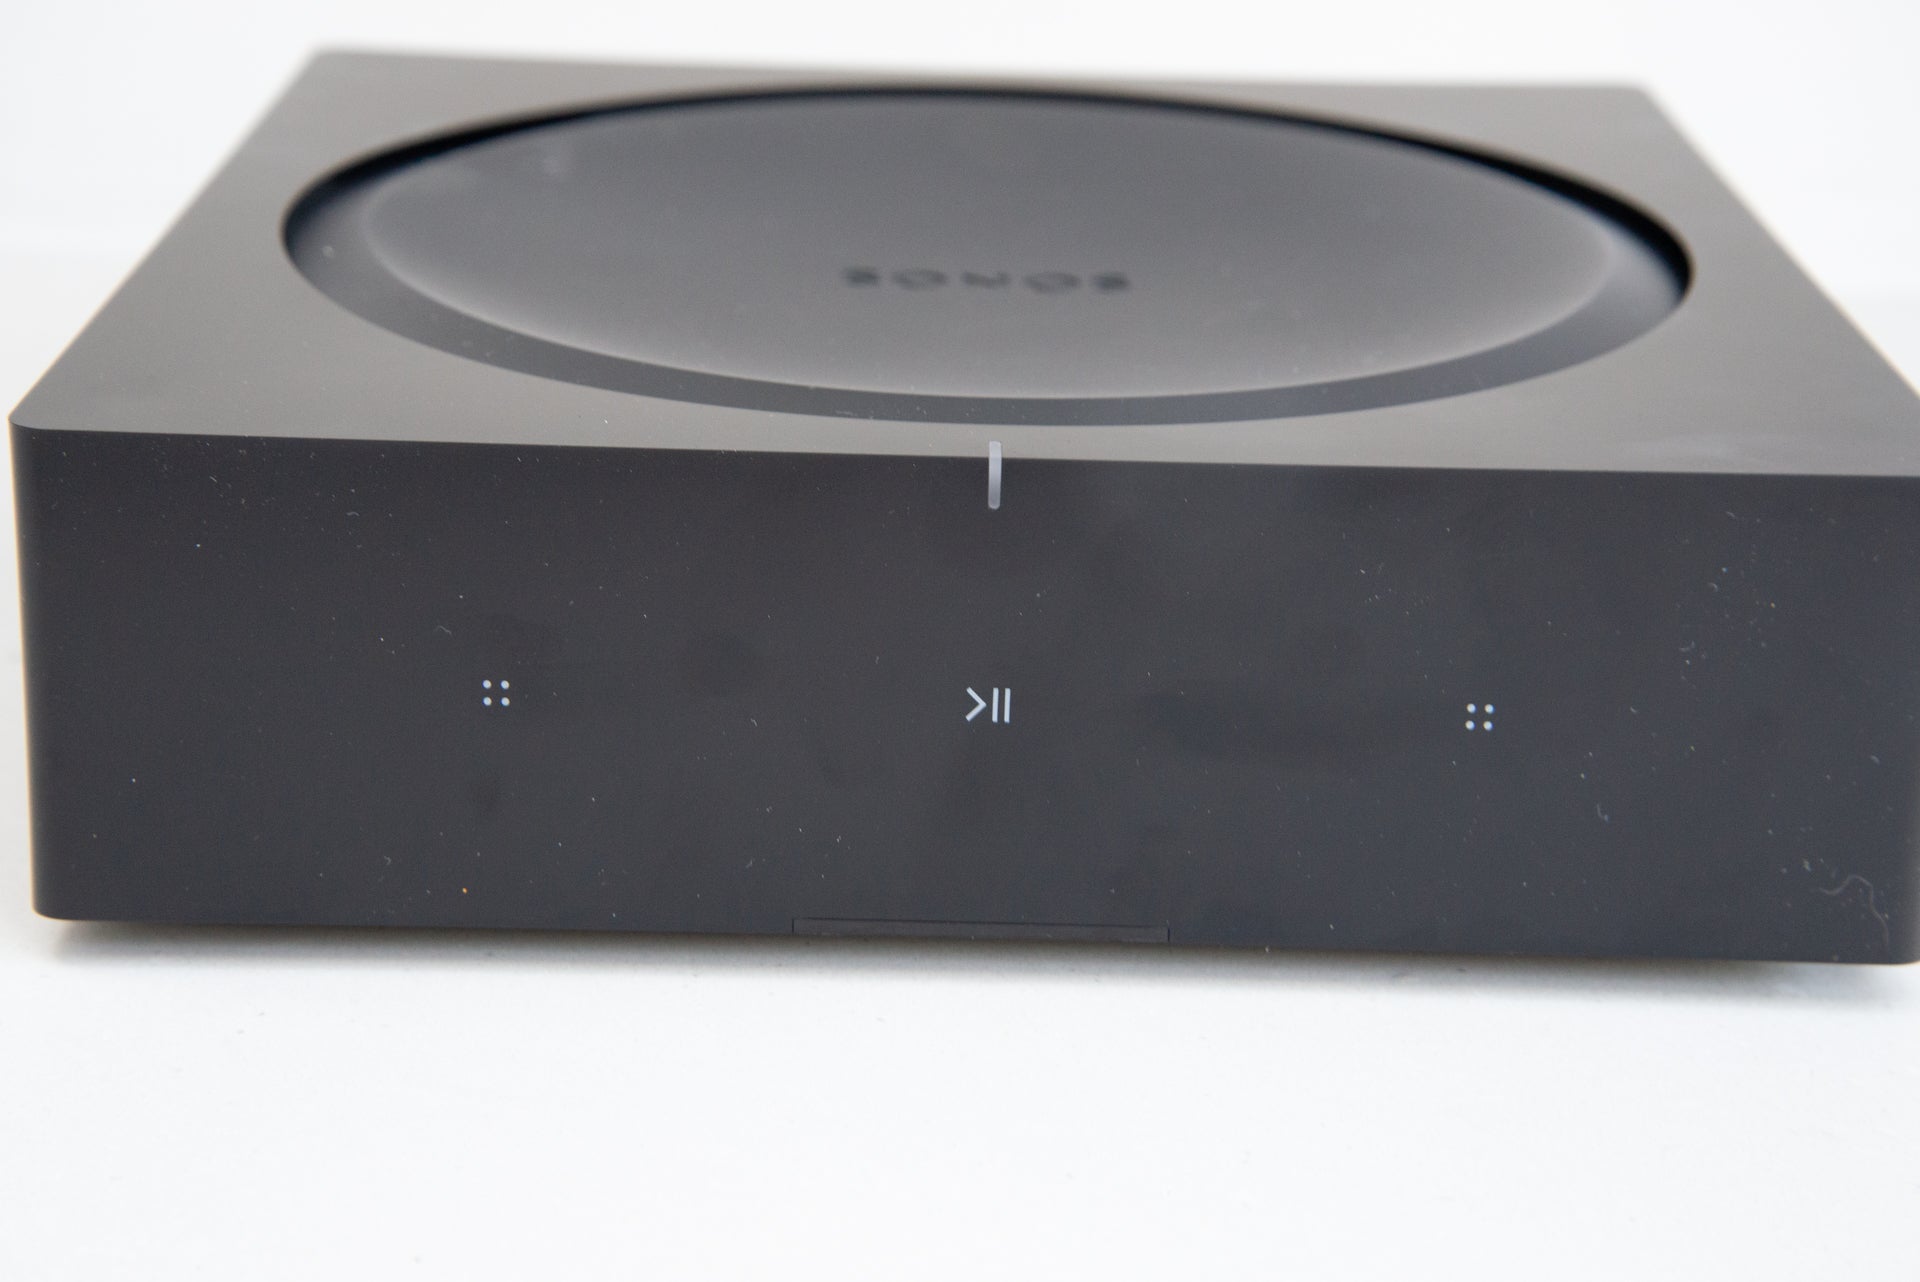 How to use vinyl with Sonos